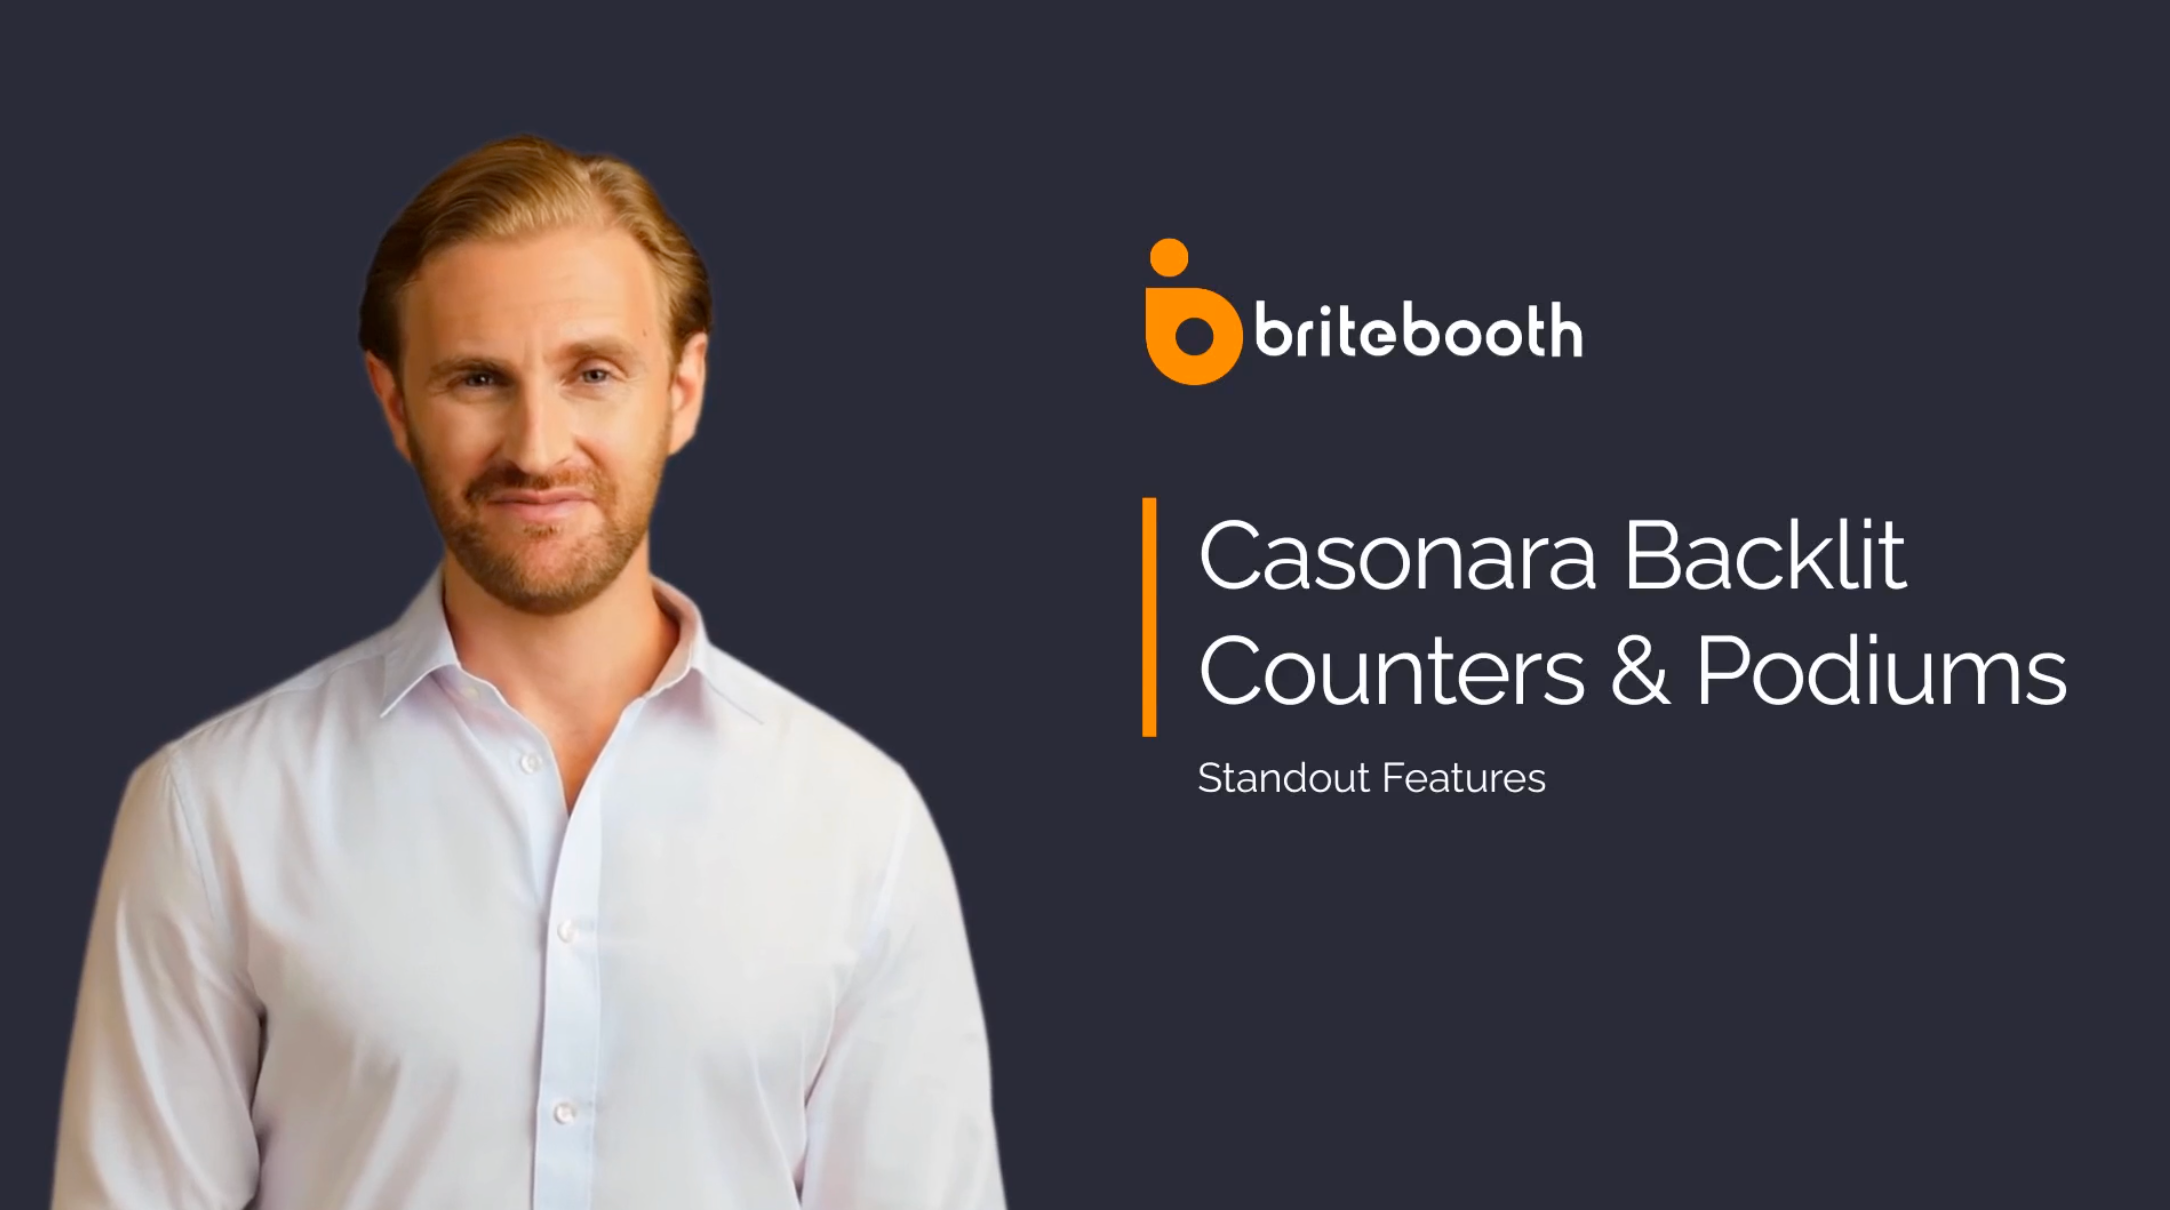 Load video: Details and Features of the Casonara Backlit Counters